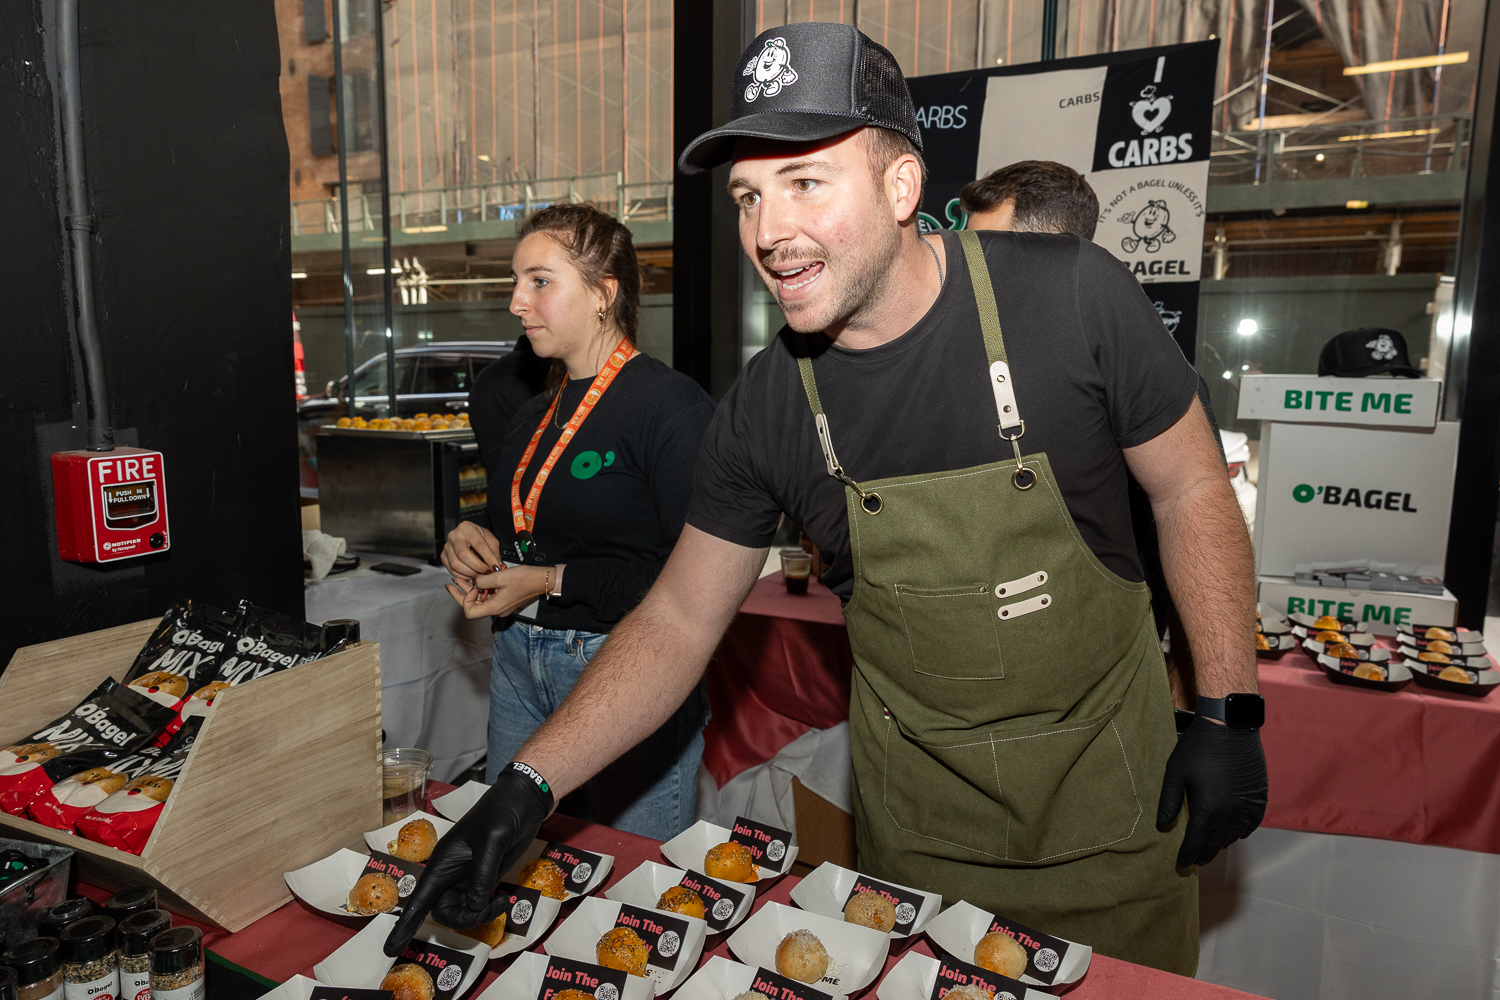 A man, from O’Bagel, in a black hat, shirt and green apron pointing at their parmesan and sun-dried tomato bagel bites filled with cream cheese.